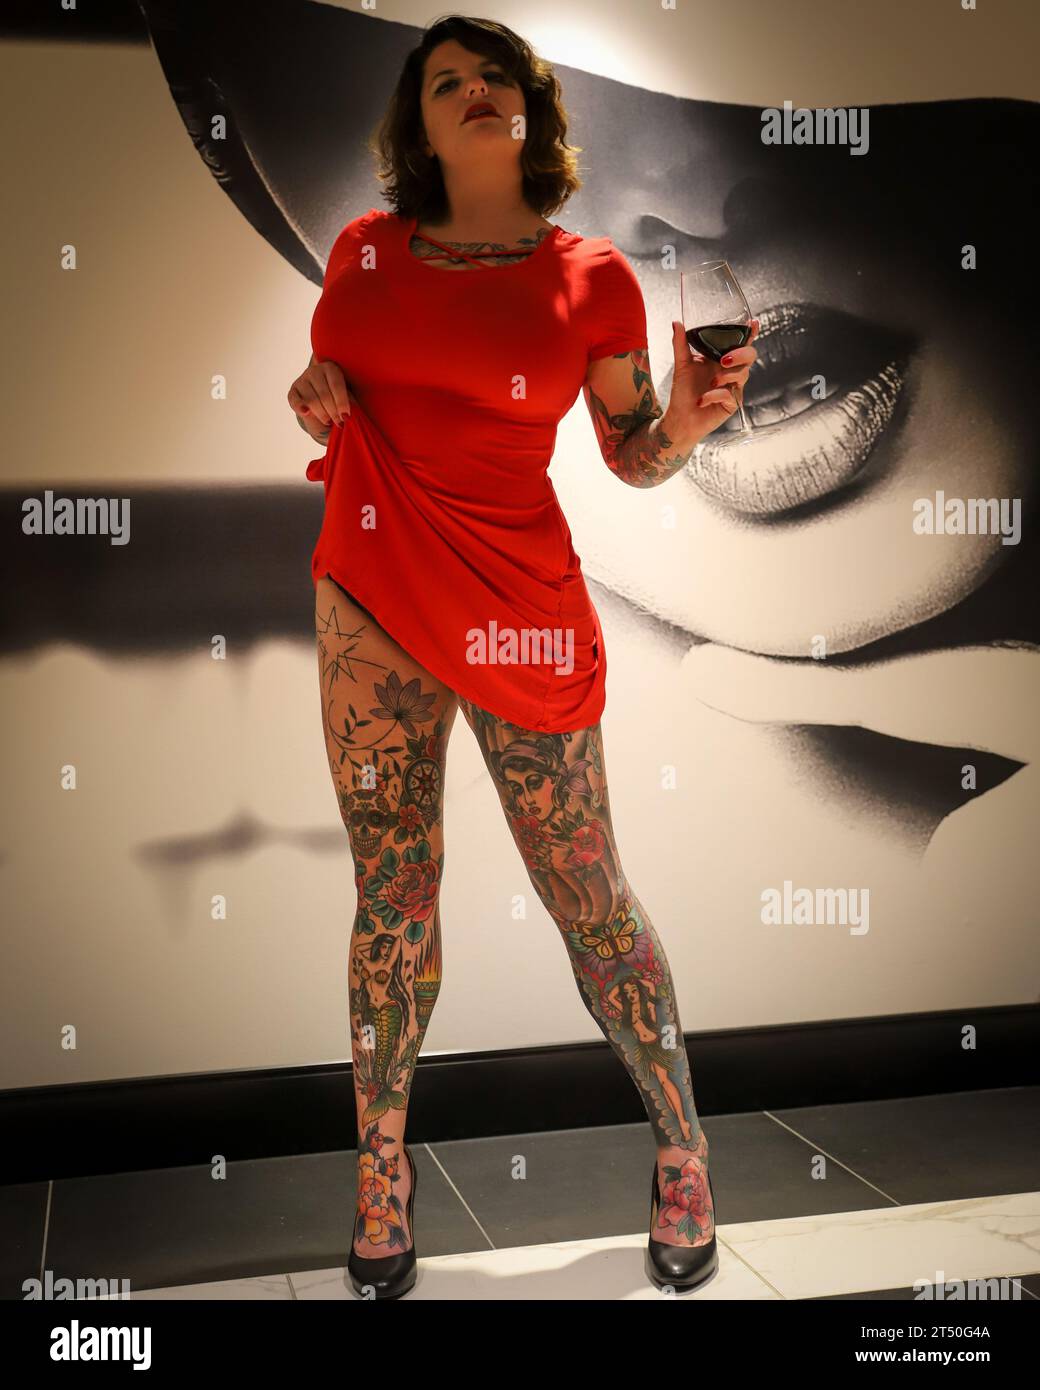 Heavily Tattooed Woman in Red Dress Stock Photo